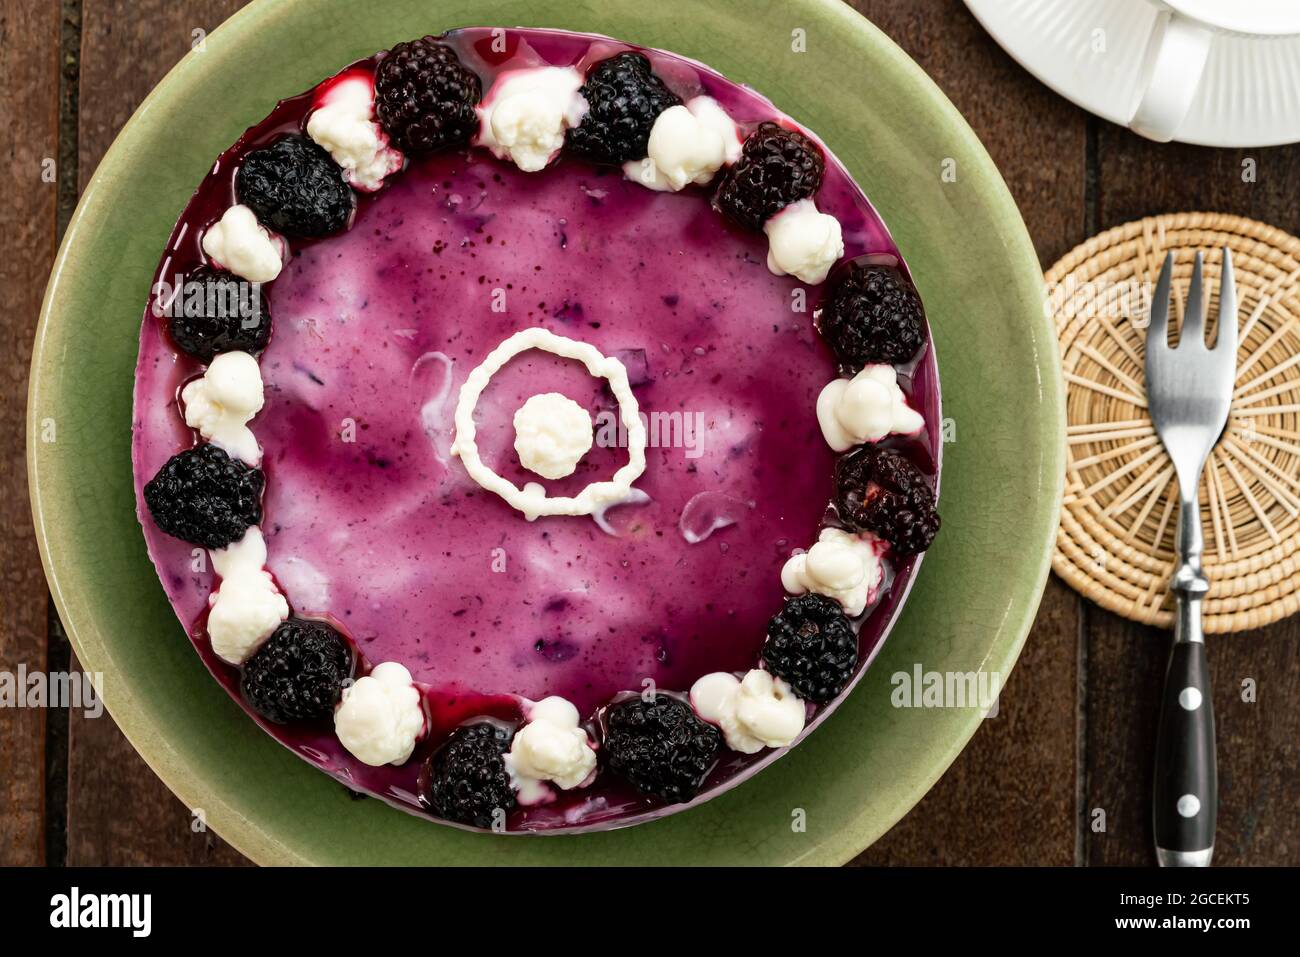 Top view of homemade blackberry cheesecake garnished with preserved blackberry and white cream in green ceramic plate on wooden table. Stock Photo